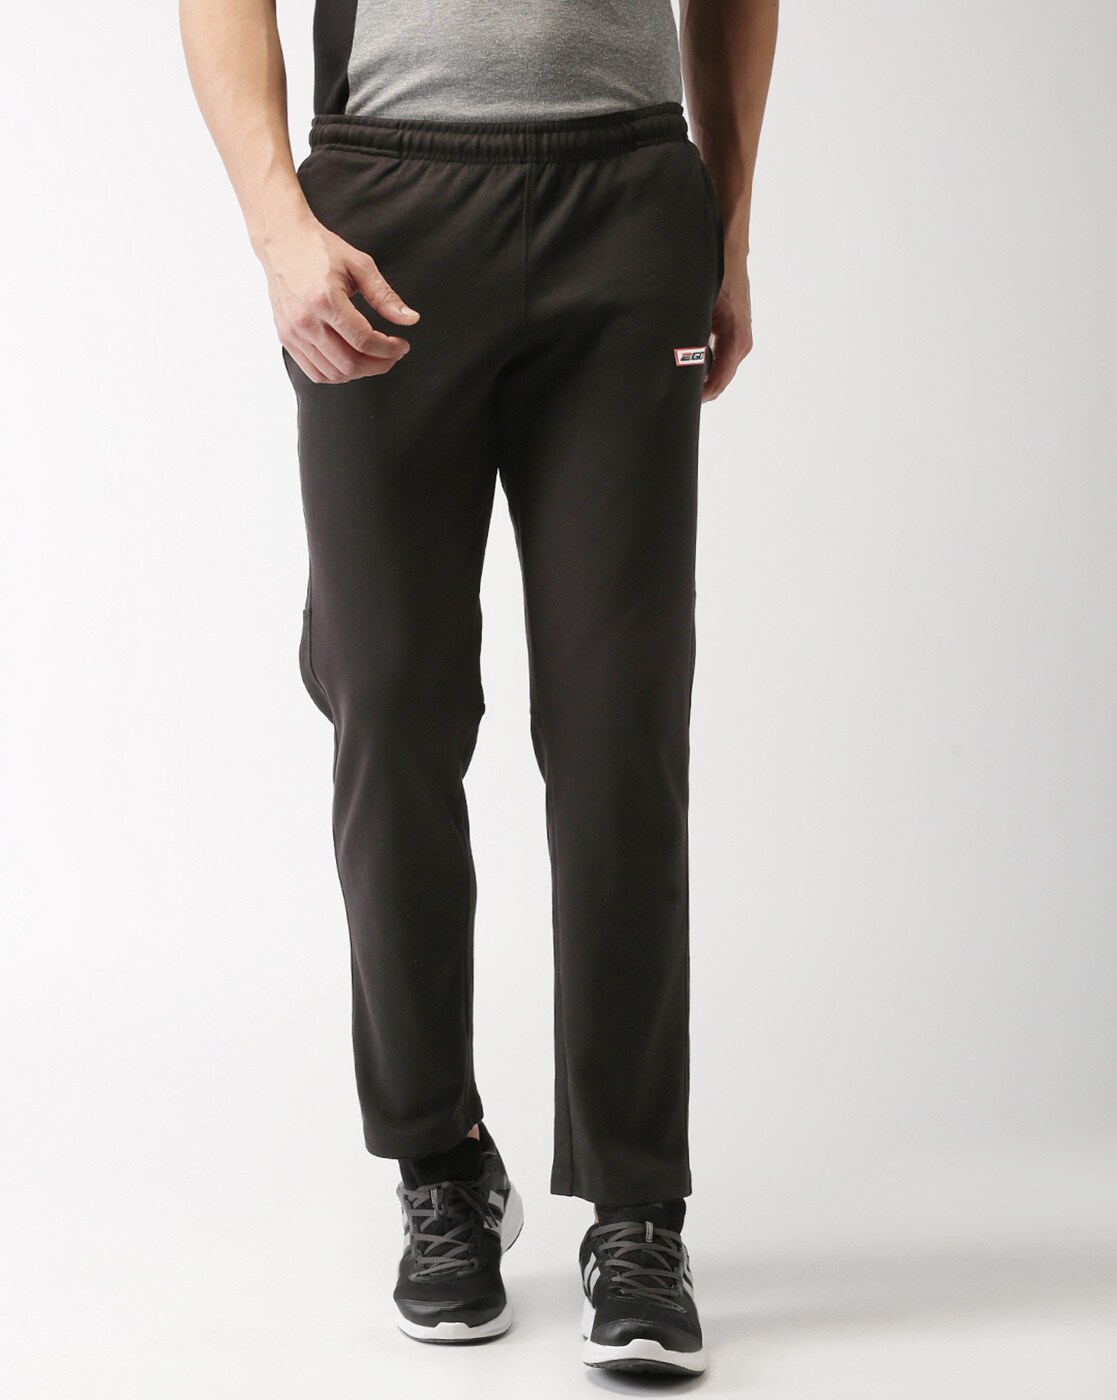 Buy Charcoal Grey Track Pants for Men by 2Go Online | Ajio.com